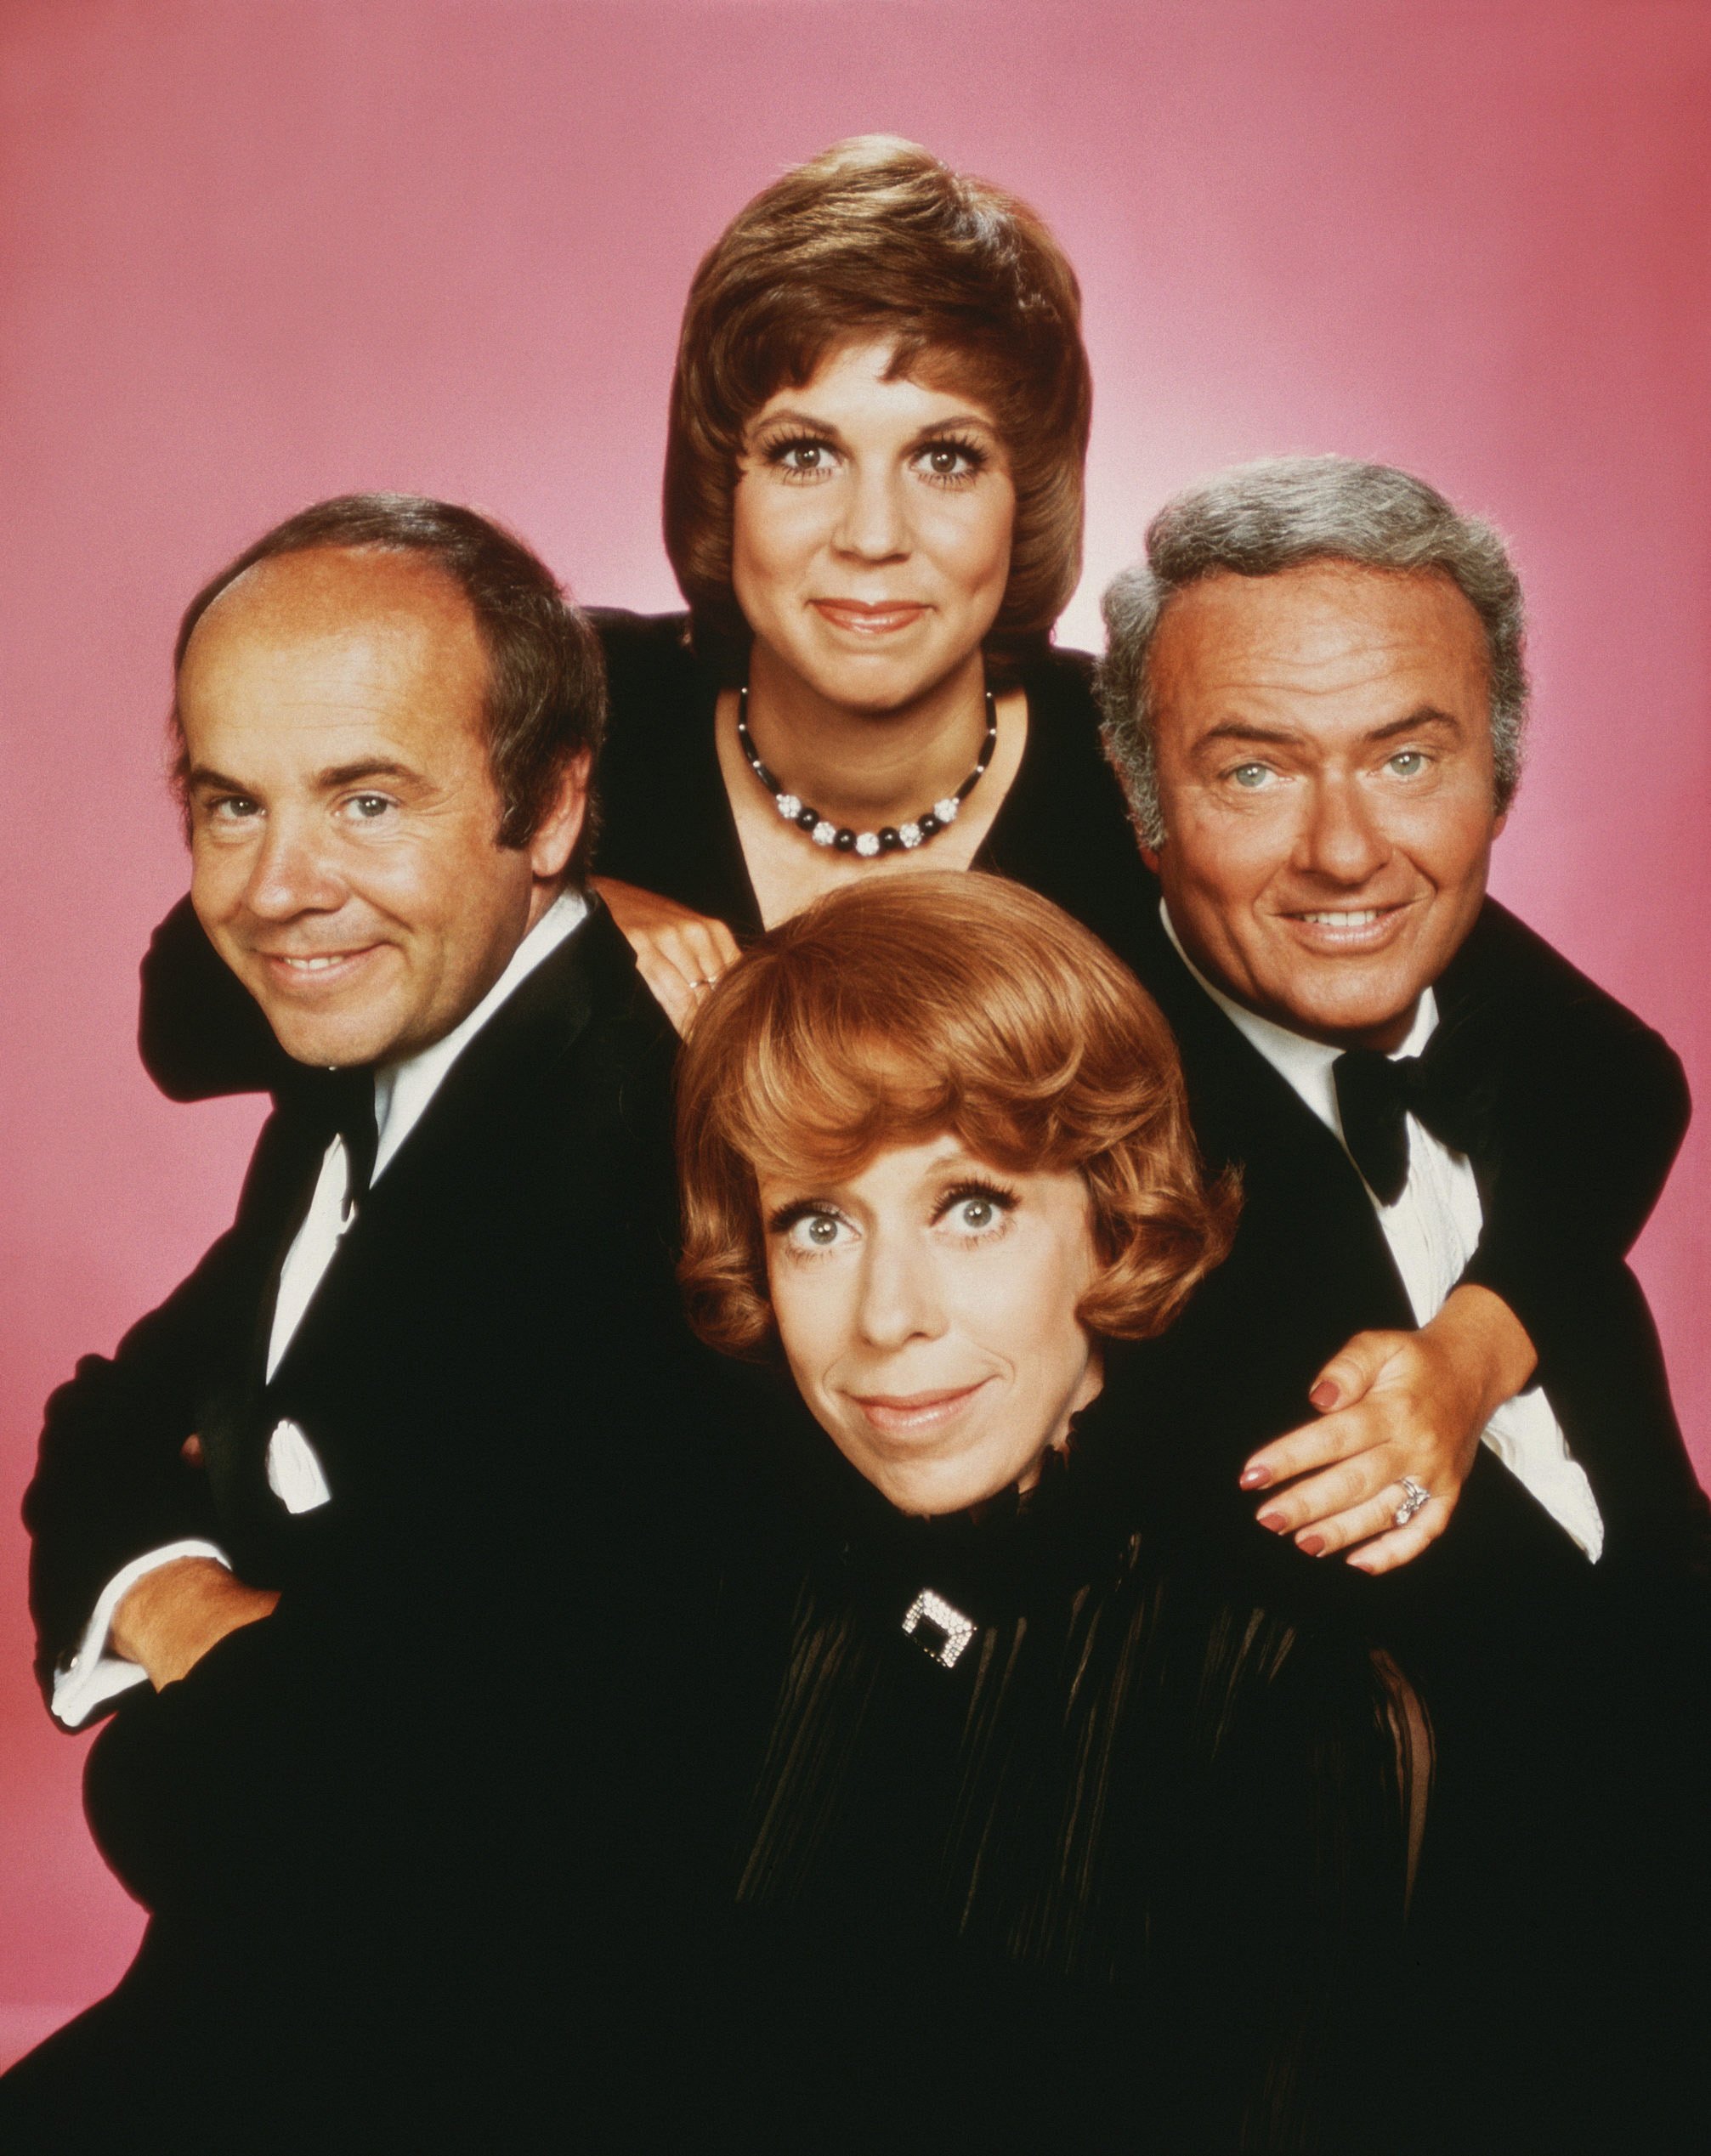 From top left: Vicki Lawrence, actor Harvey Korman, Carol Burnett and actor Tim Conway pictured in a studio portrait of the comedy variety series, "The Carol Burnett Show," in 1975. / Source: Getty Images